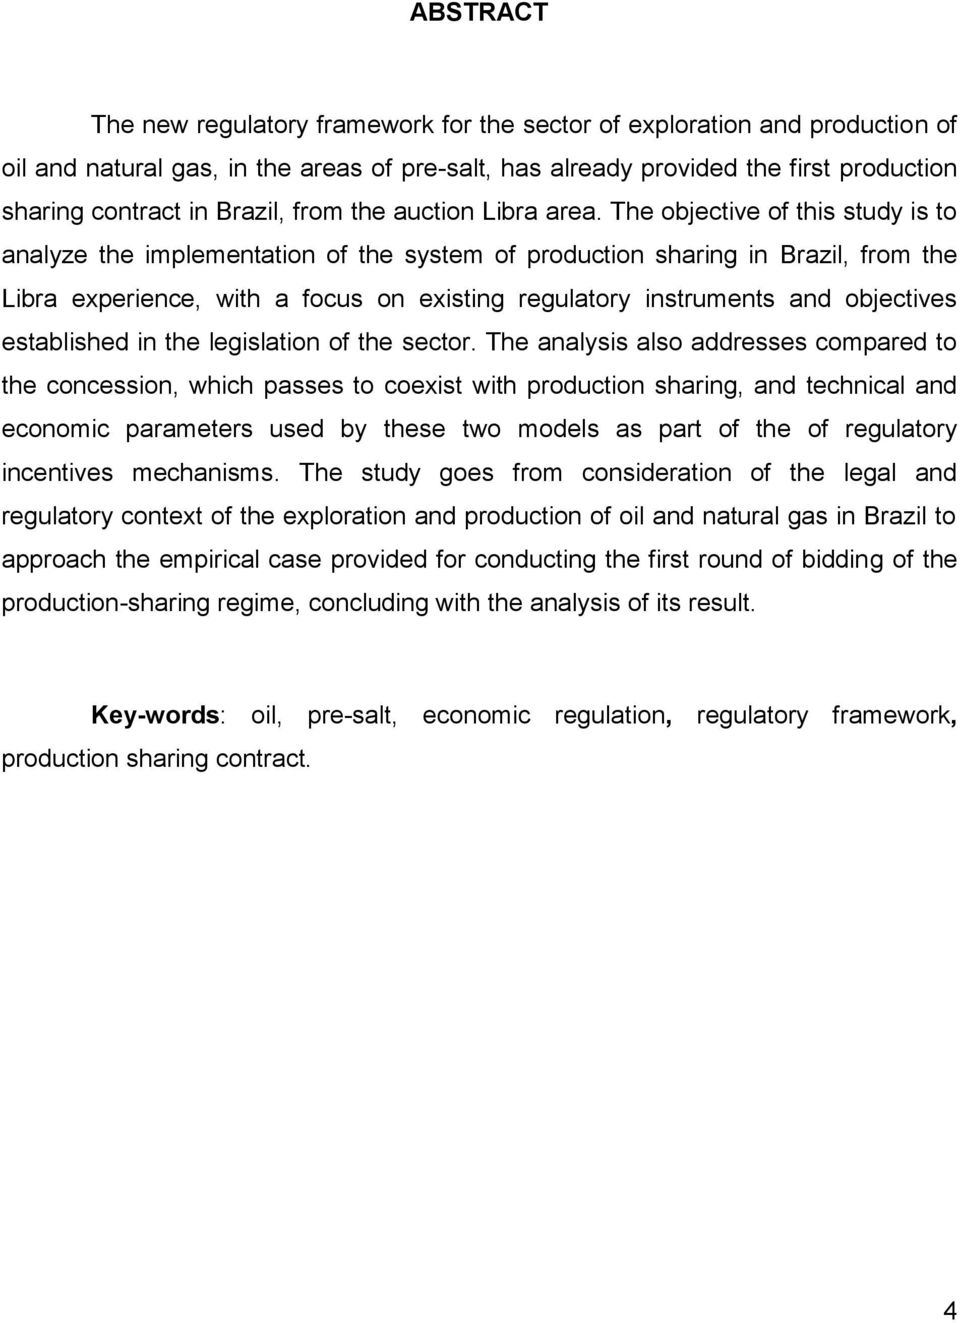 The objective of this study is to analyze the implementation of the system of production sharing in Brazil, from the Libra experience, with a focus on existing regulatory instruments and objectives